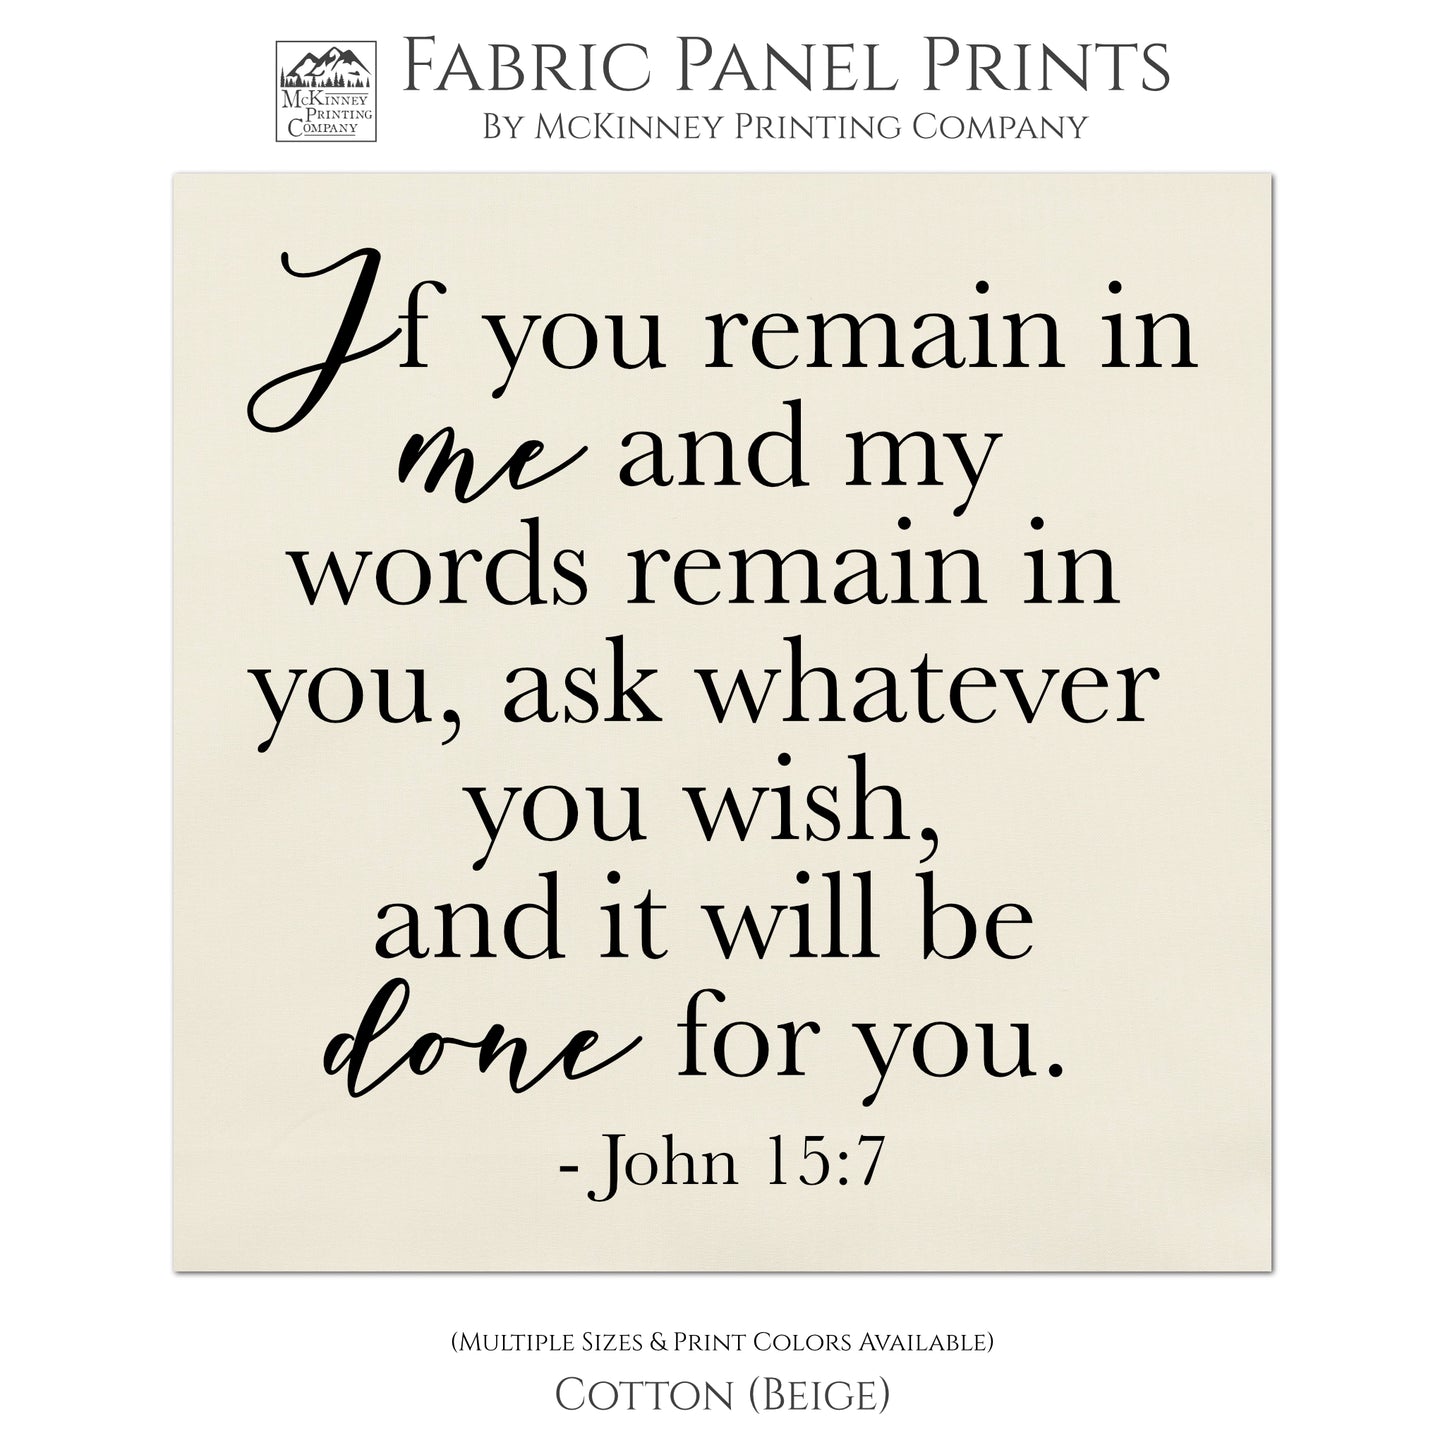 Bible Verse Wall Art - If you remain in me and my words remain in you, ask whatever you wish, and it will be done for you. - John 15 7 - Scripture Fabric, Quilt Block, Large, Small - Cotton